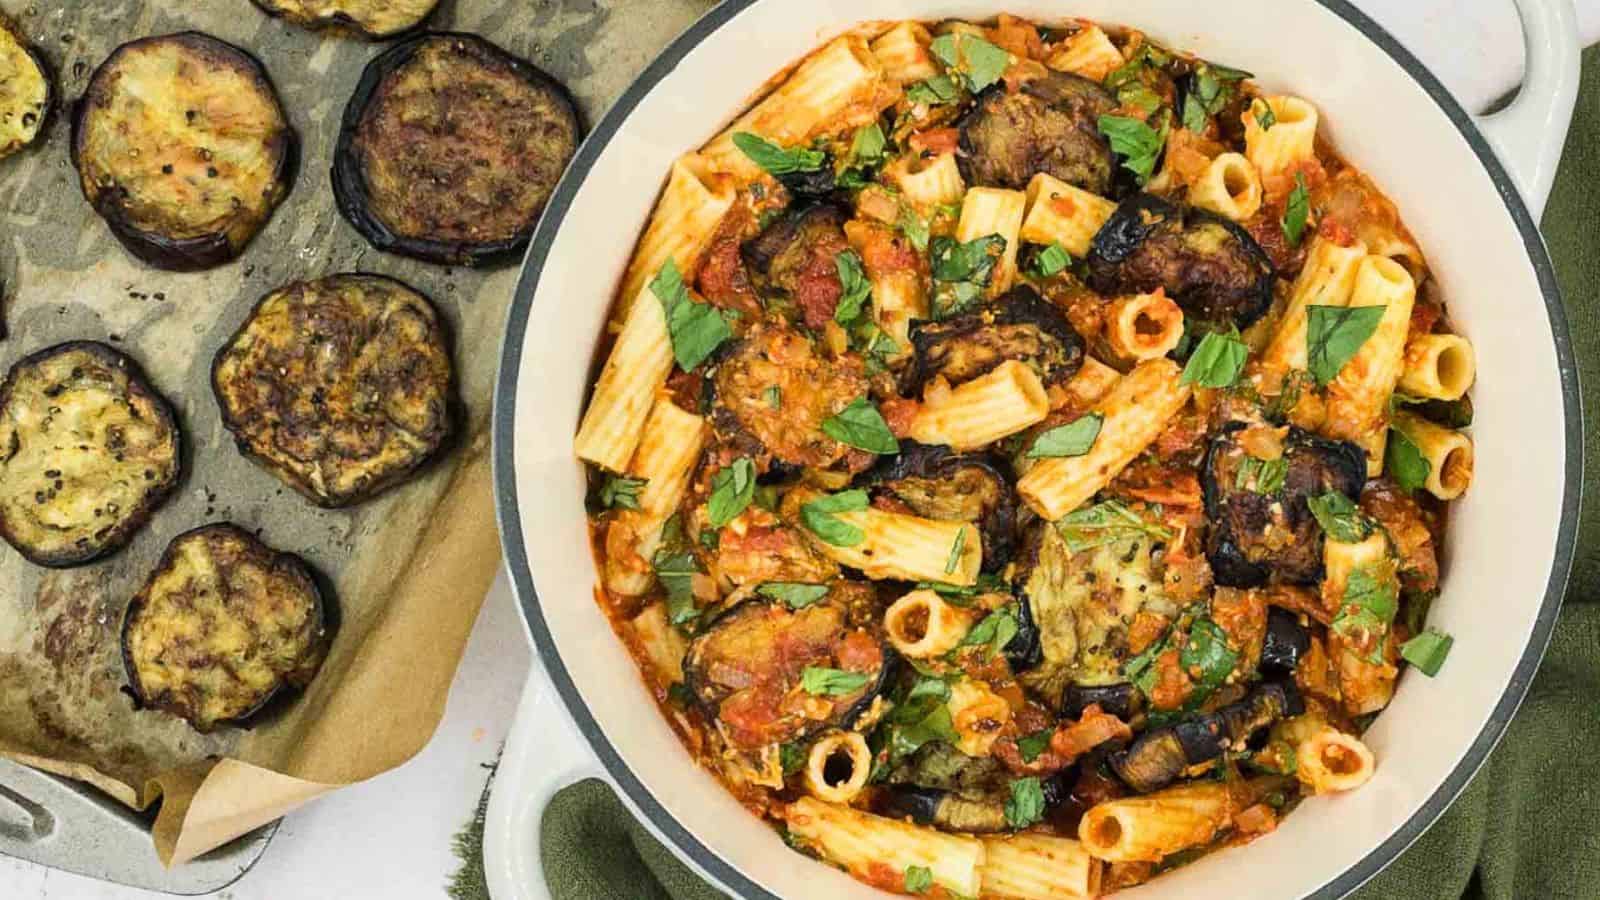 Buckle Up! These 13 Pasta Dishes Are A One-way Trip To Flavortown